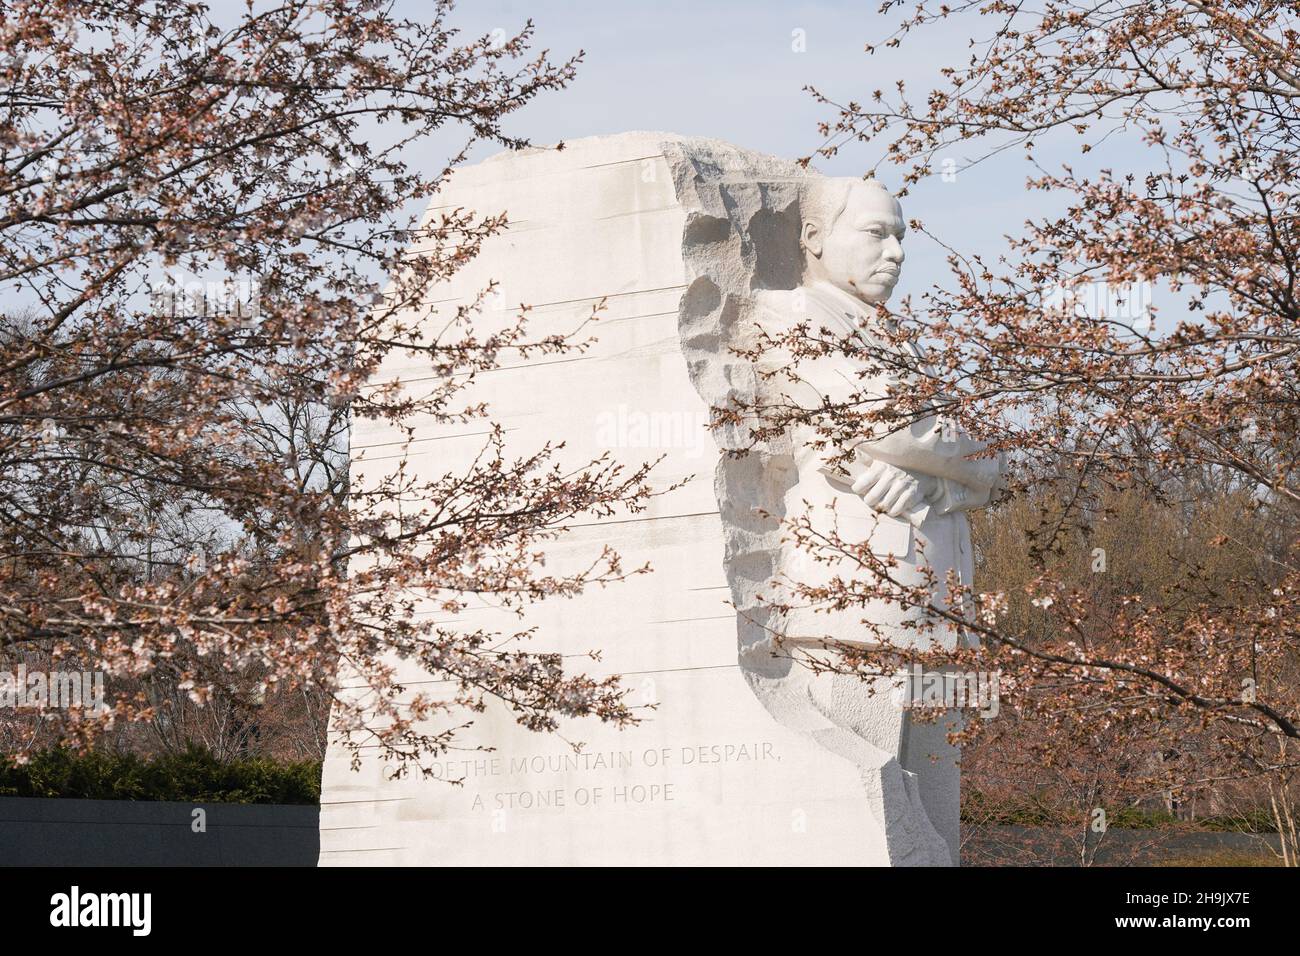 The Martin Luther King Memorial in Washington DC in the United States. From a series of travel photos in the United States. Photo date: Thursday, March 29, 2018. Photo credit should read: Richard Gray/EMPICS Stock Photo